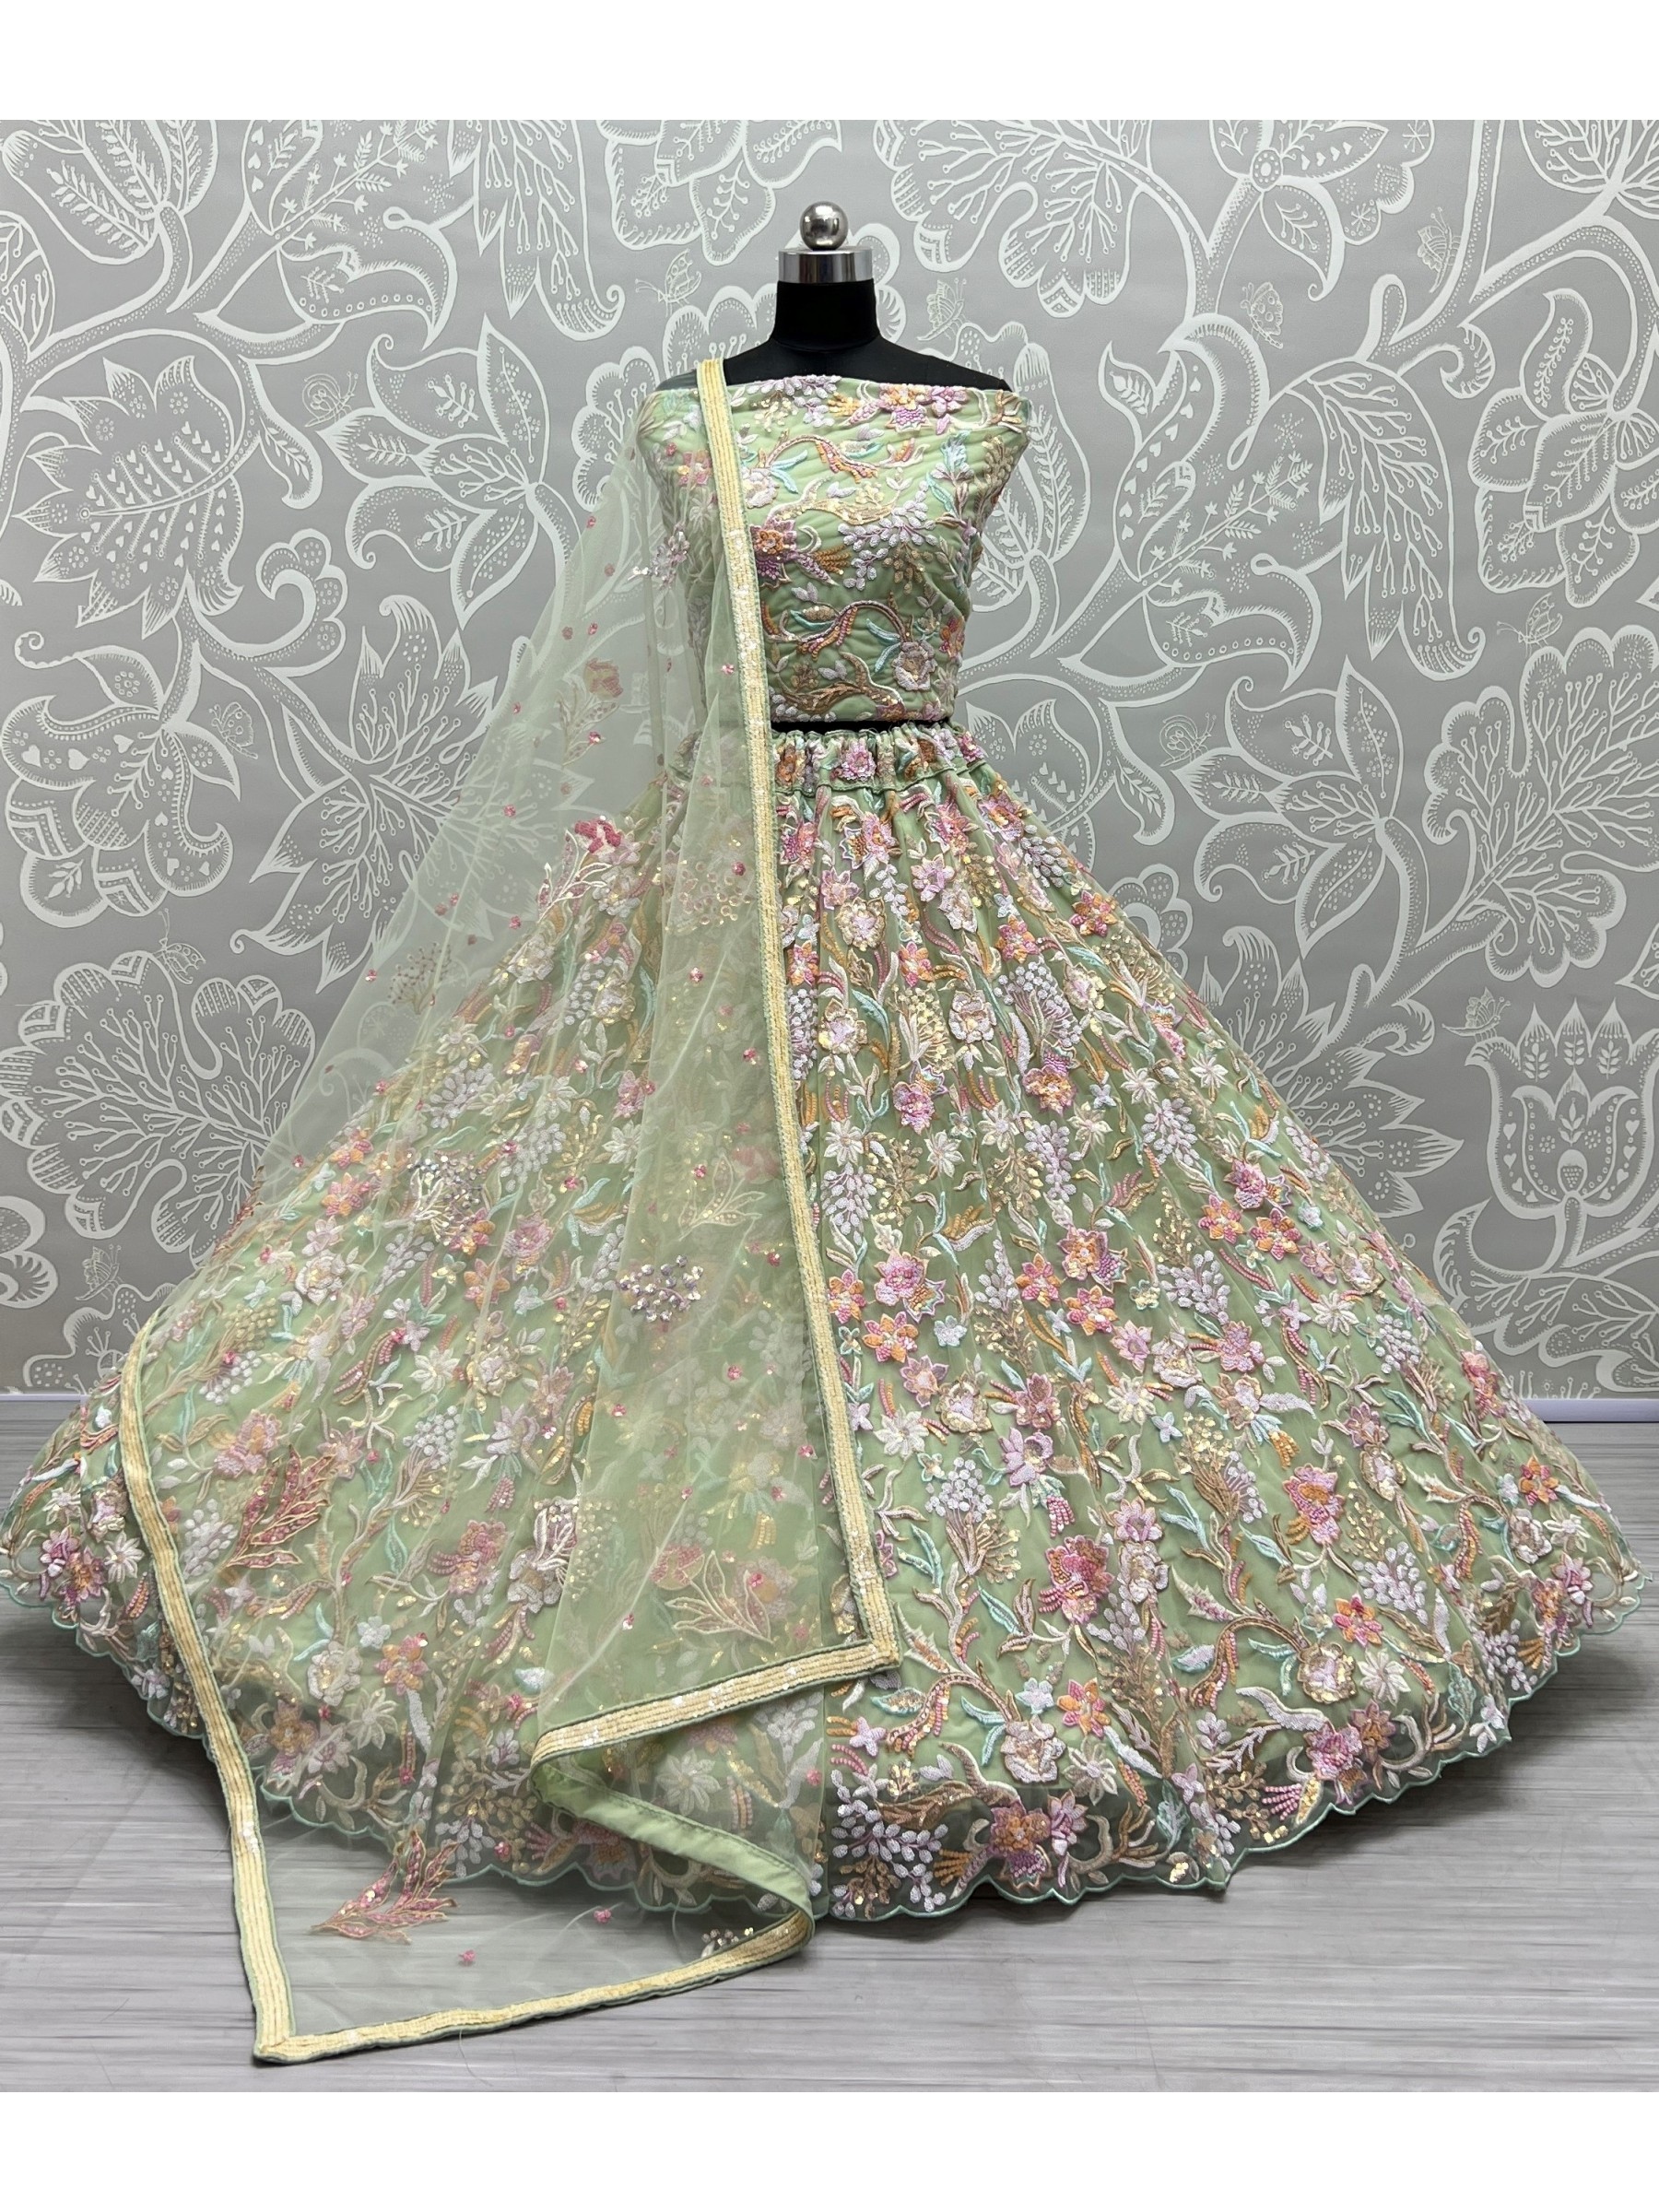 Soft Premium Net  Party Wear Lehenga In Green Color  With Embroidery Work